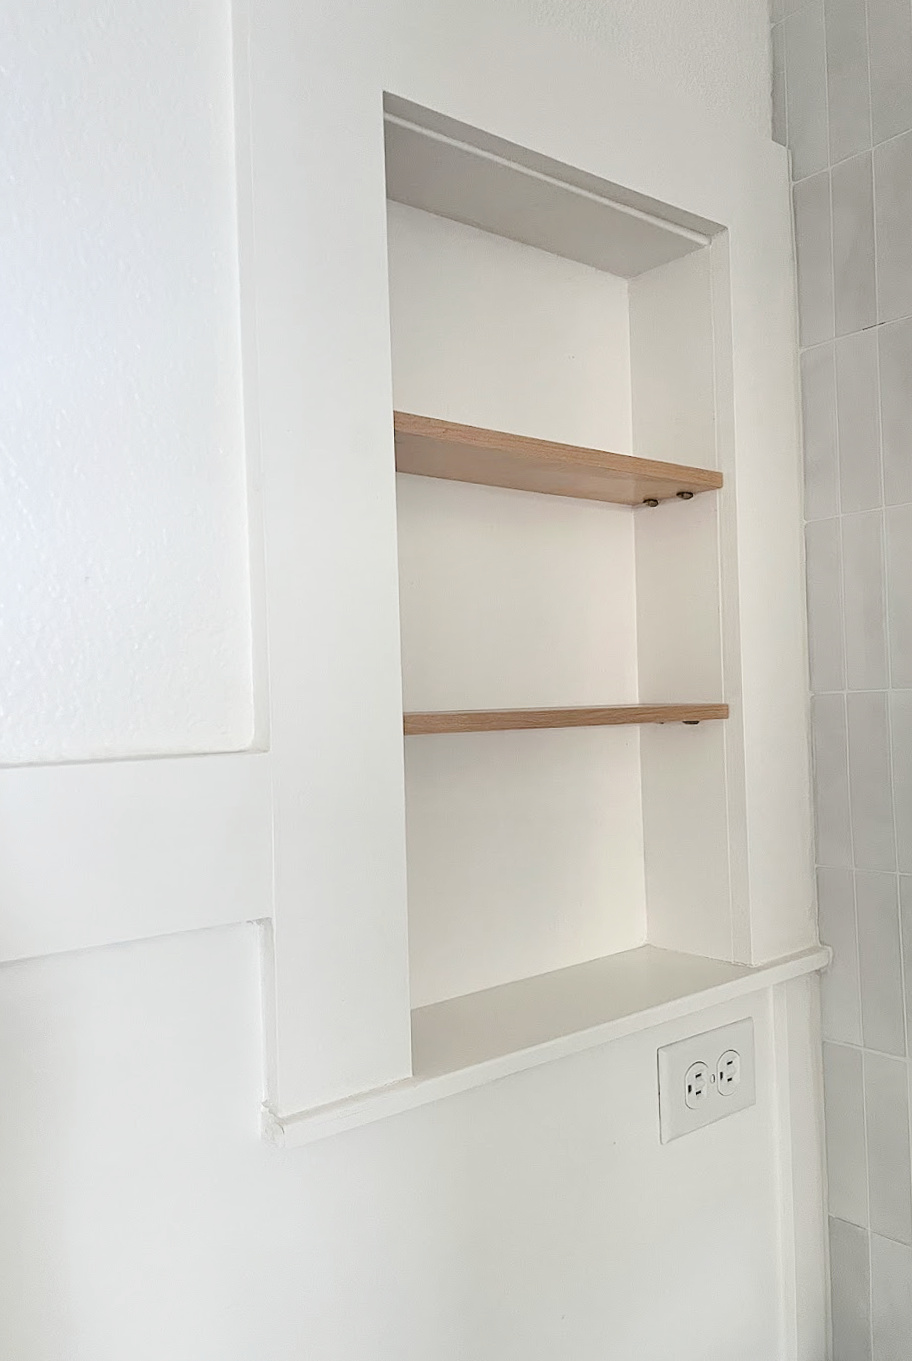 How To Turn An Old Medicine Cabinet Into Open Shelving - My